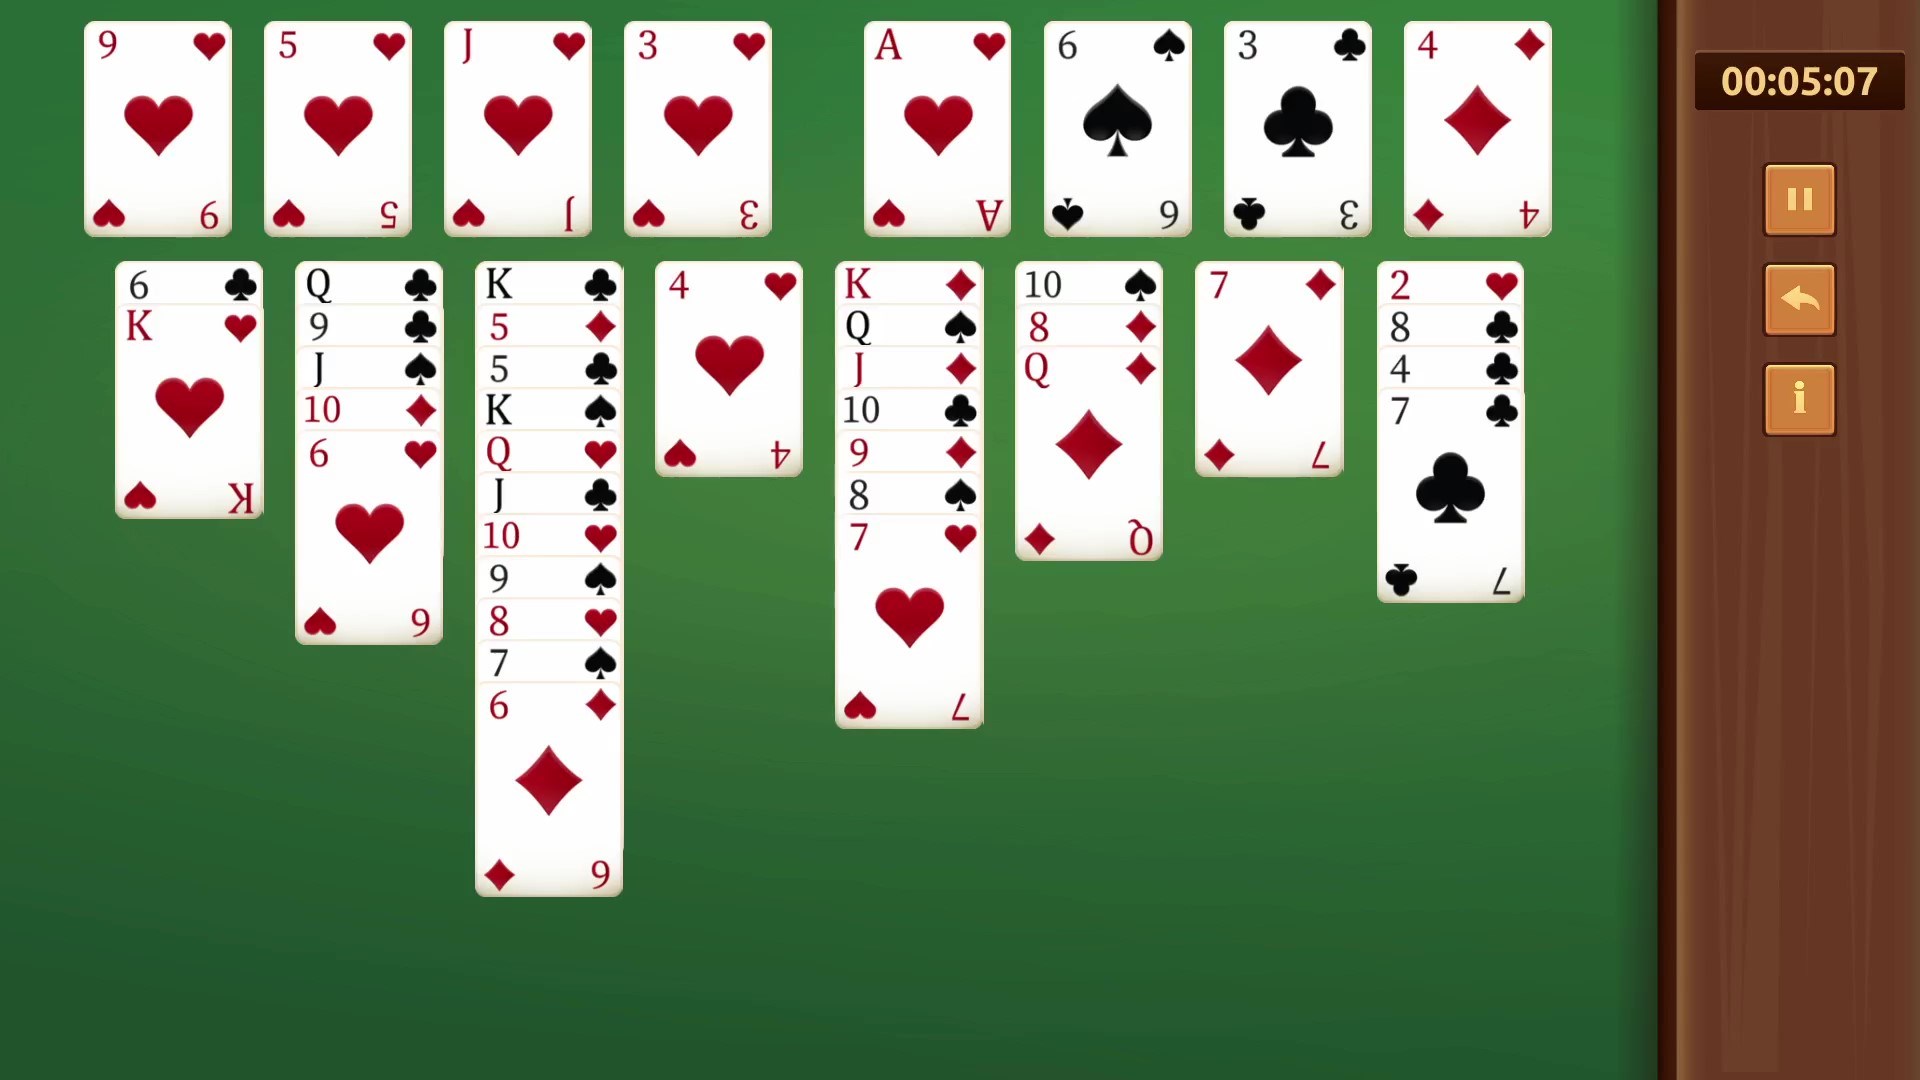 Stack ’em all with 15 in 1 Solitaire on Xbox